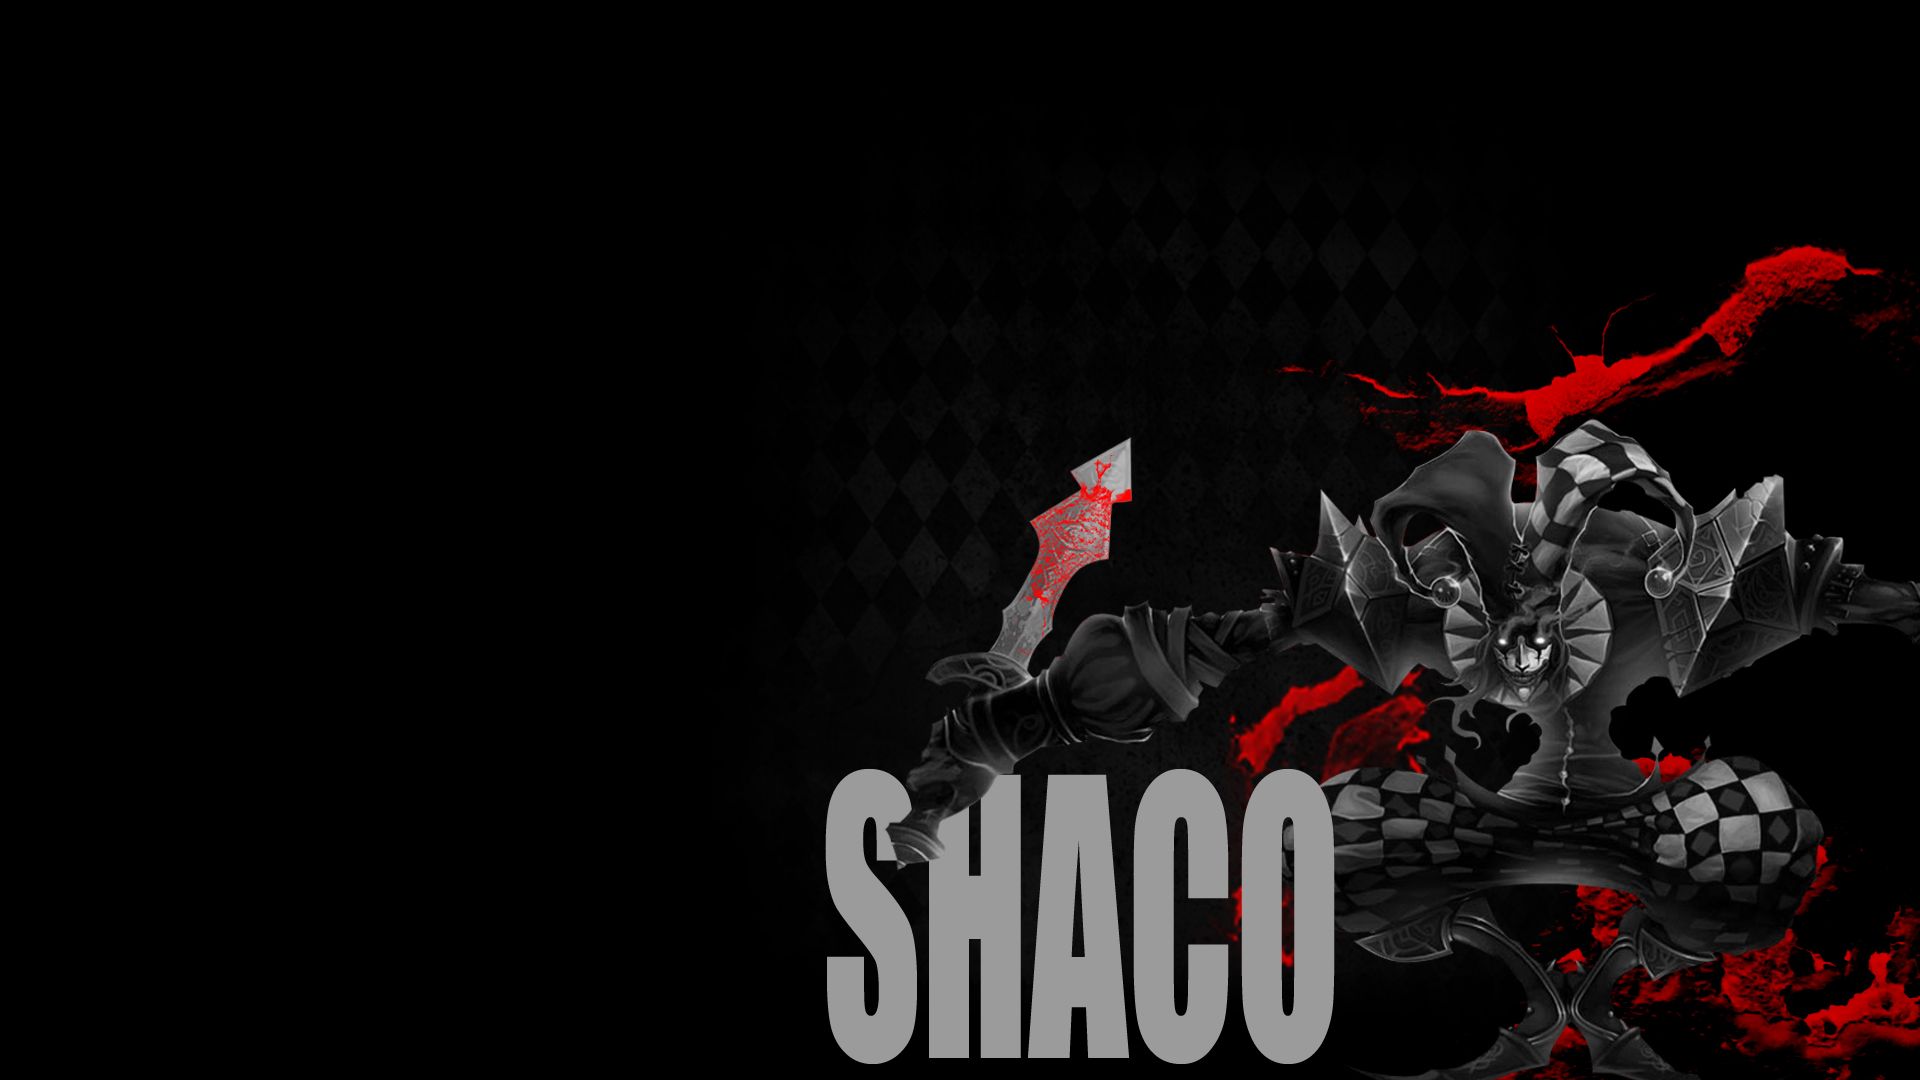 Shaco Wallpaper [1920x1080] - Can Customize by XONSOLE on DeviantArt